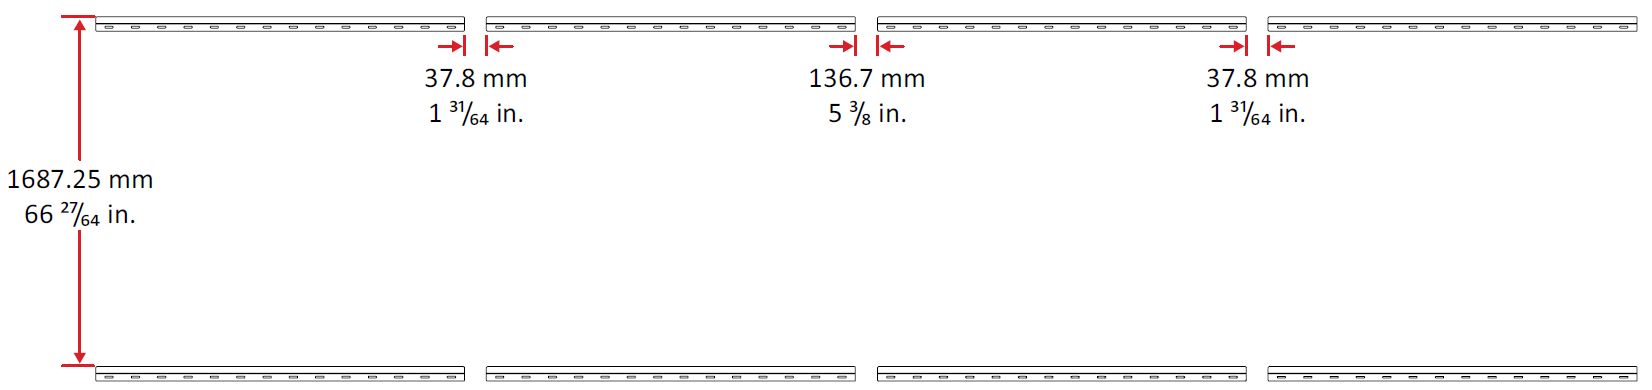 LDP163-181 DSS Wall Mount 1.png